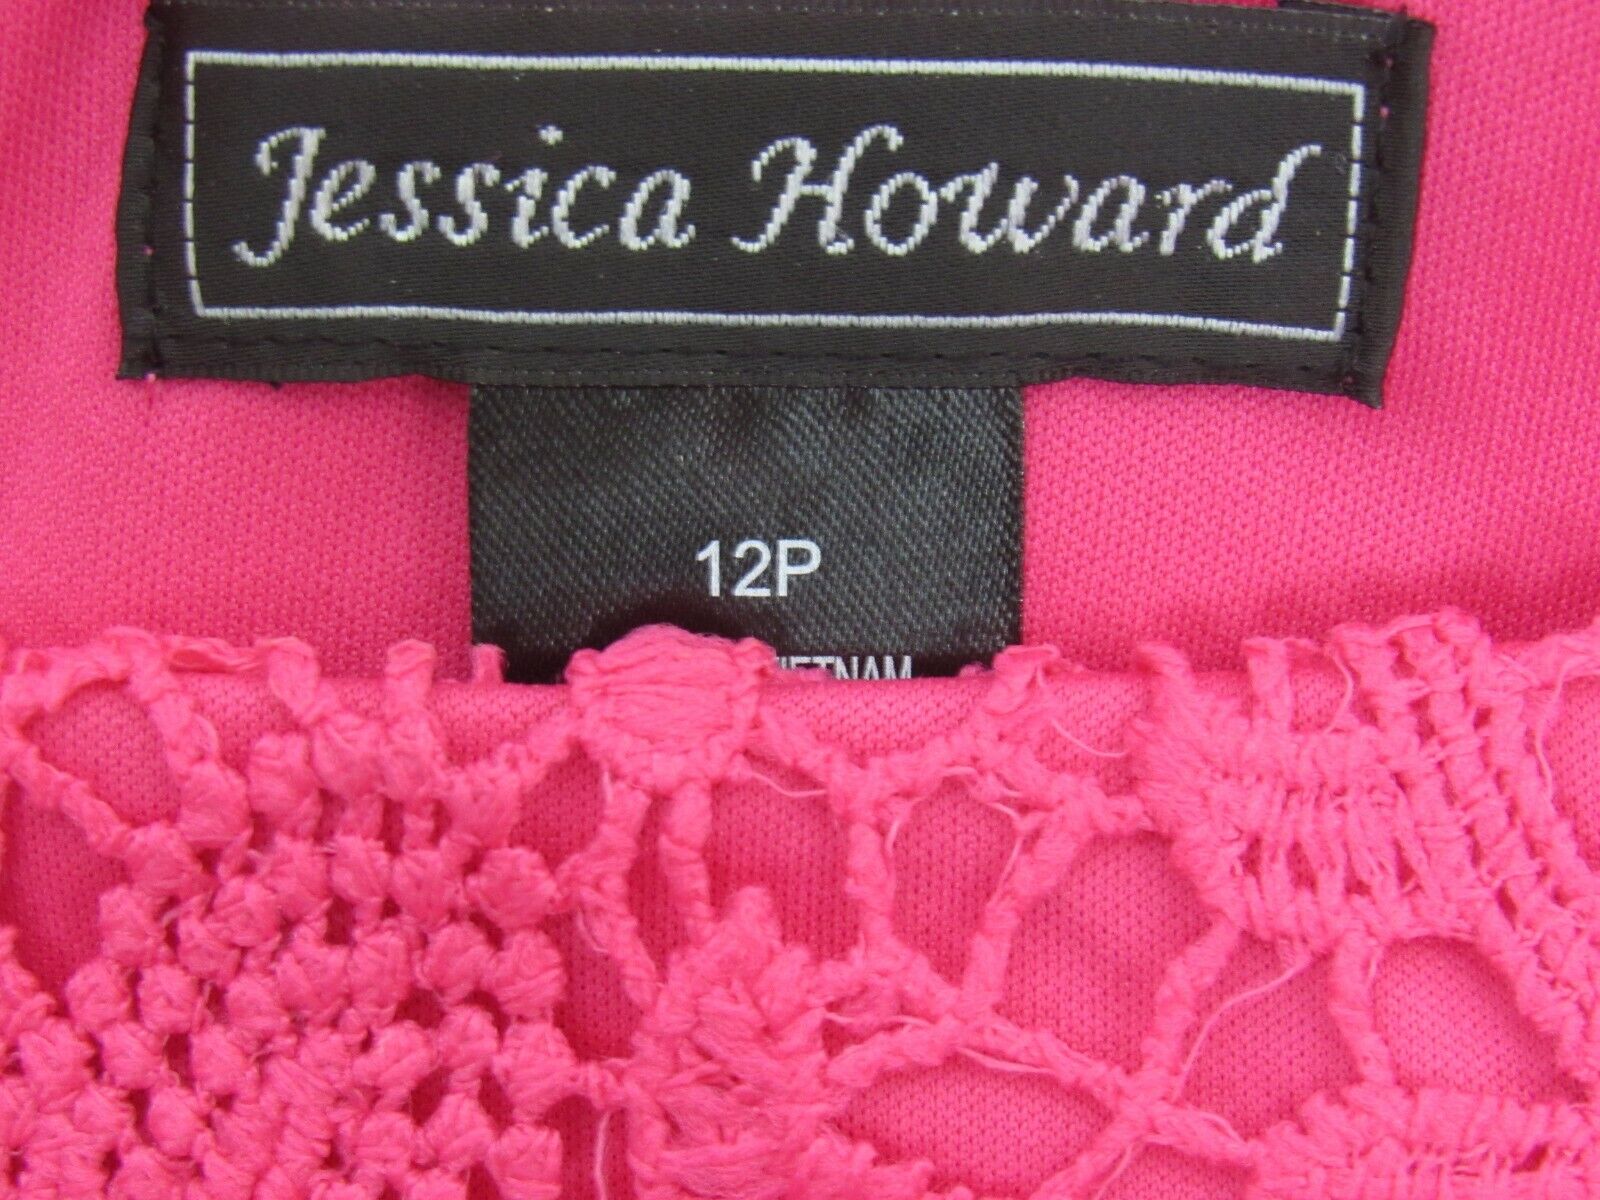 VTG 1970s 80s JESSICA HOWARD CROCHETED FLORAL LAC… - image 6